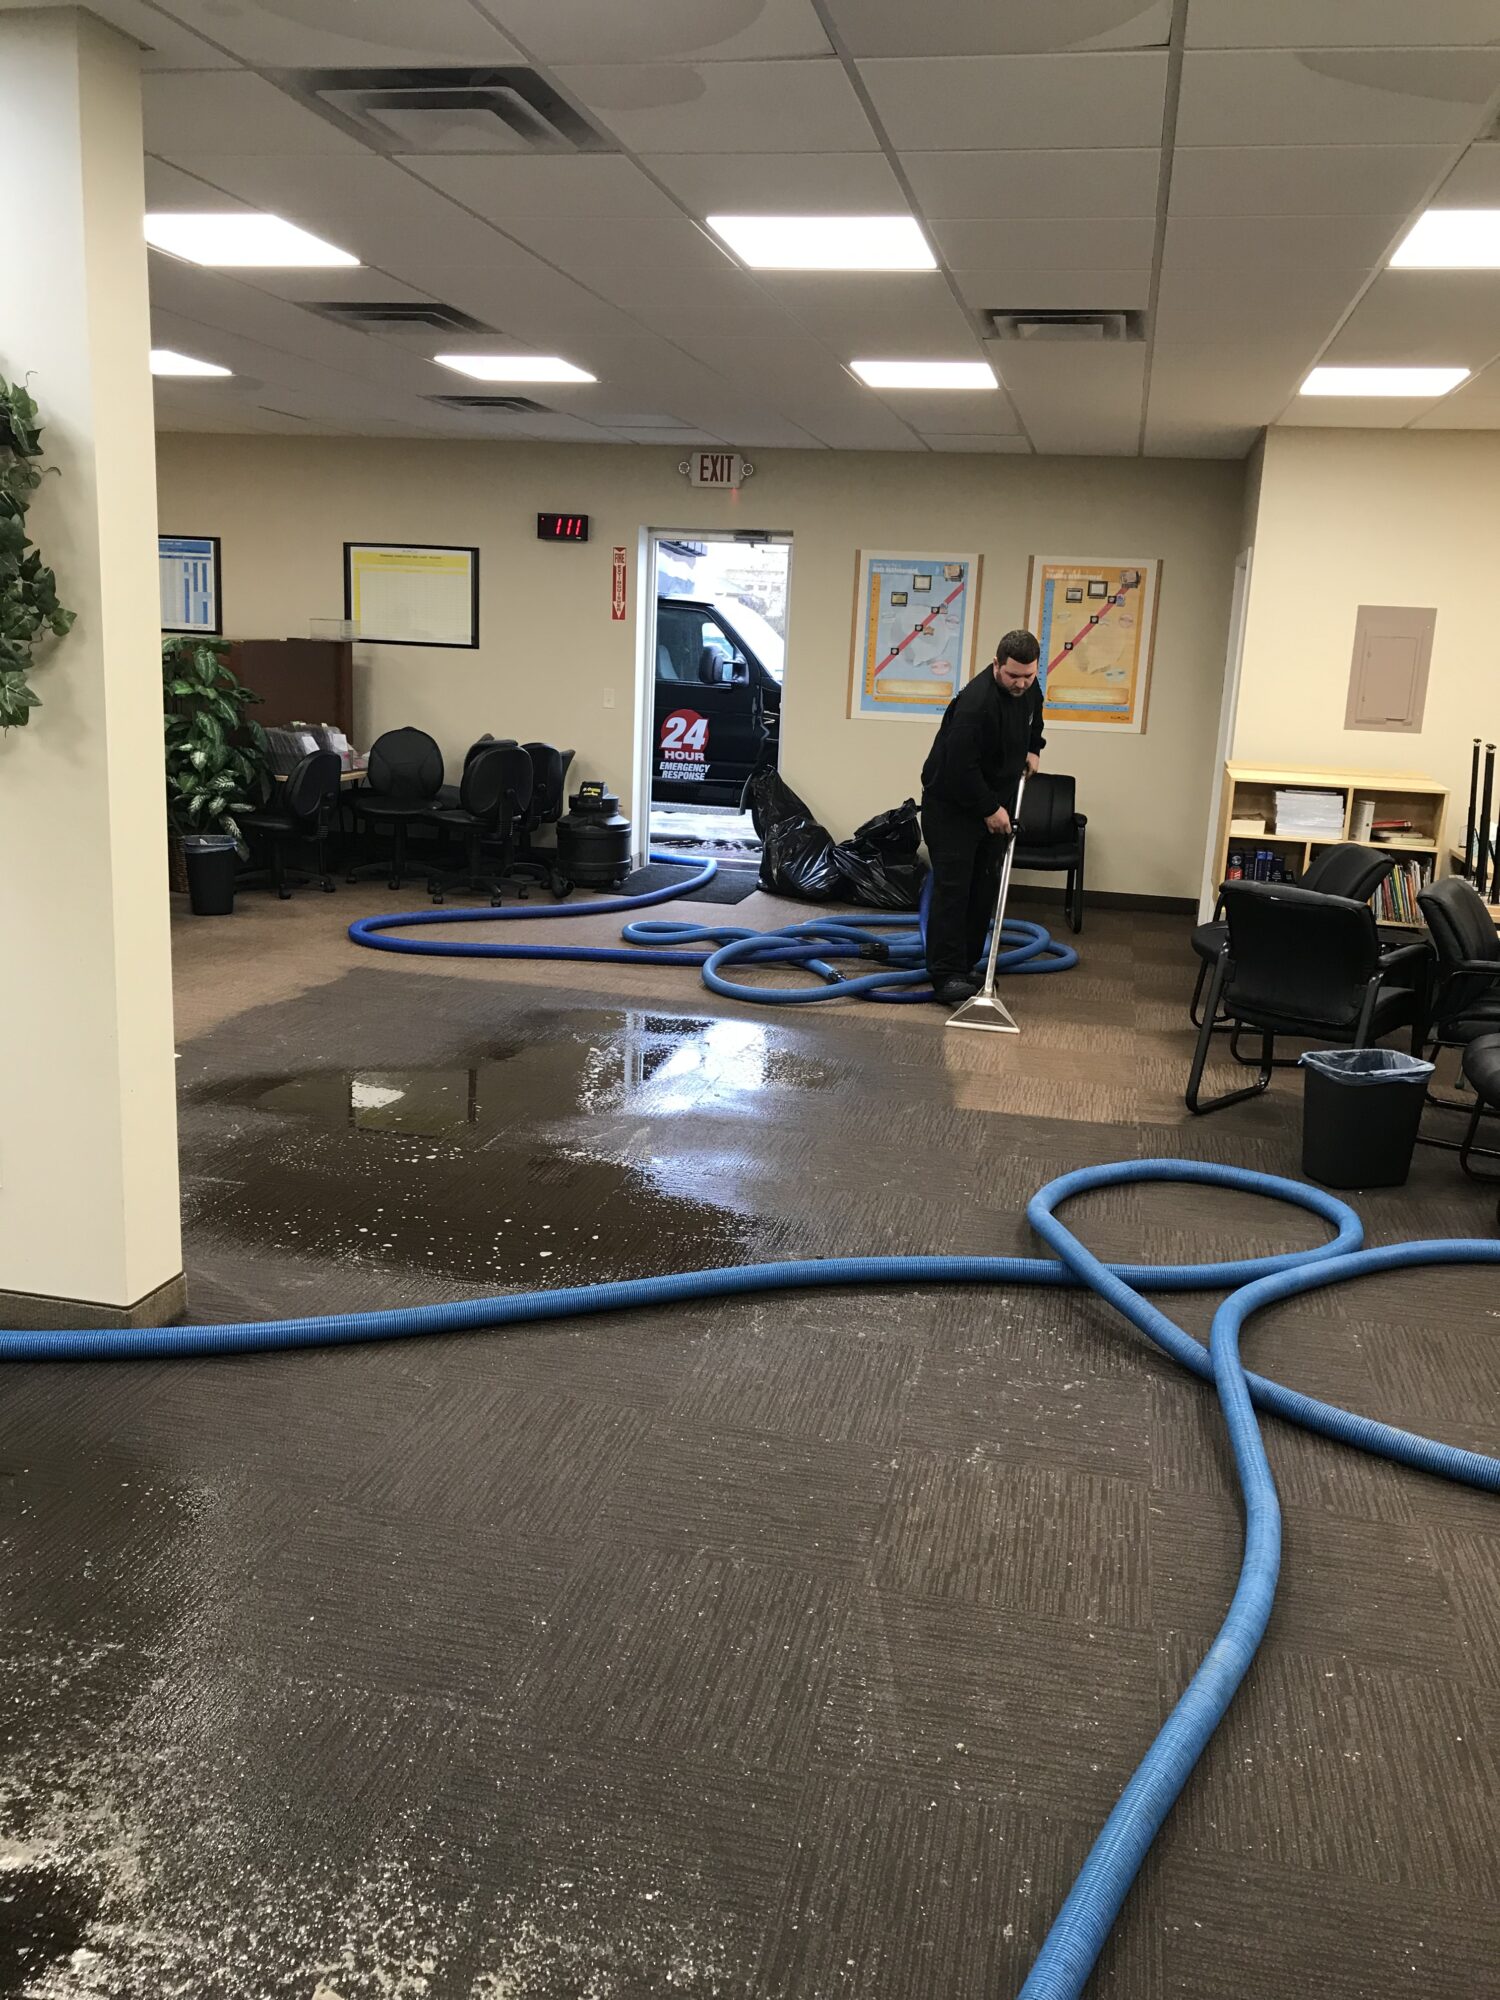 Water Damage in Office Building